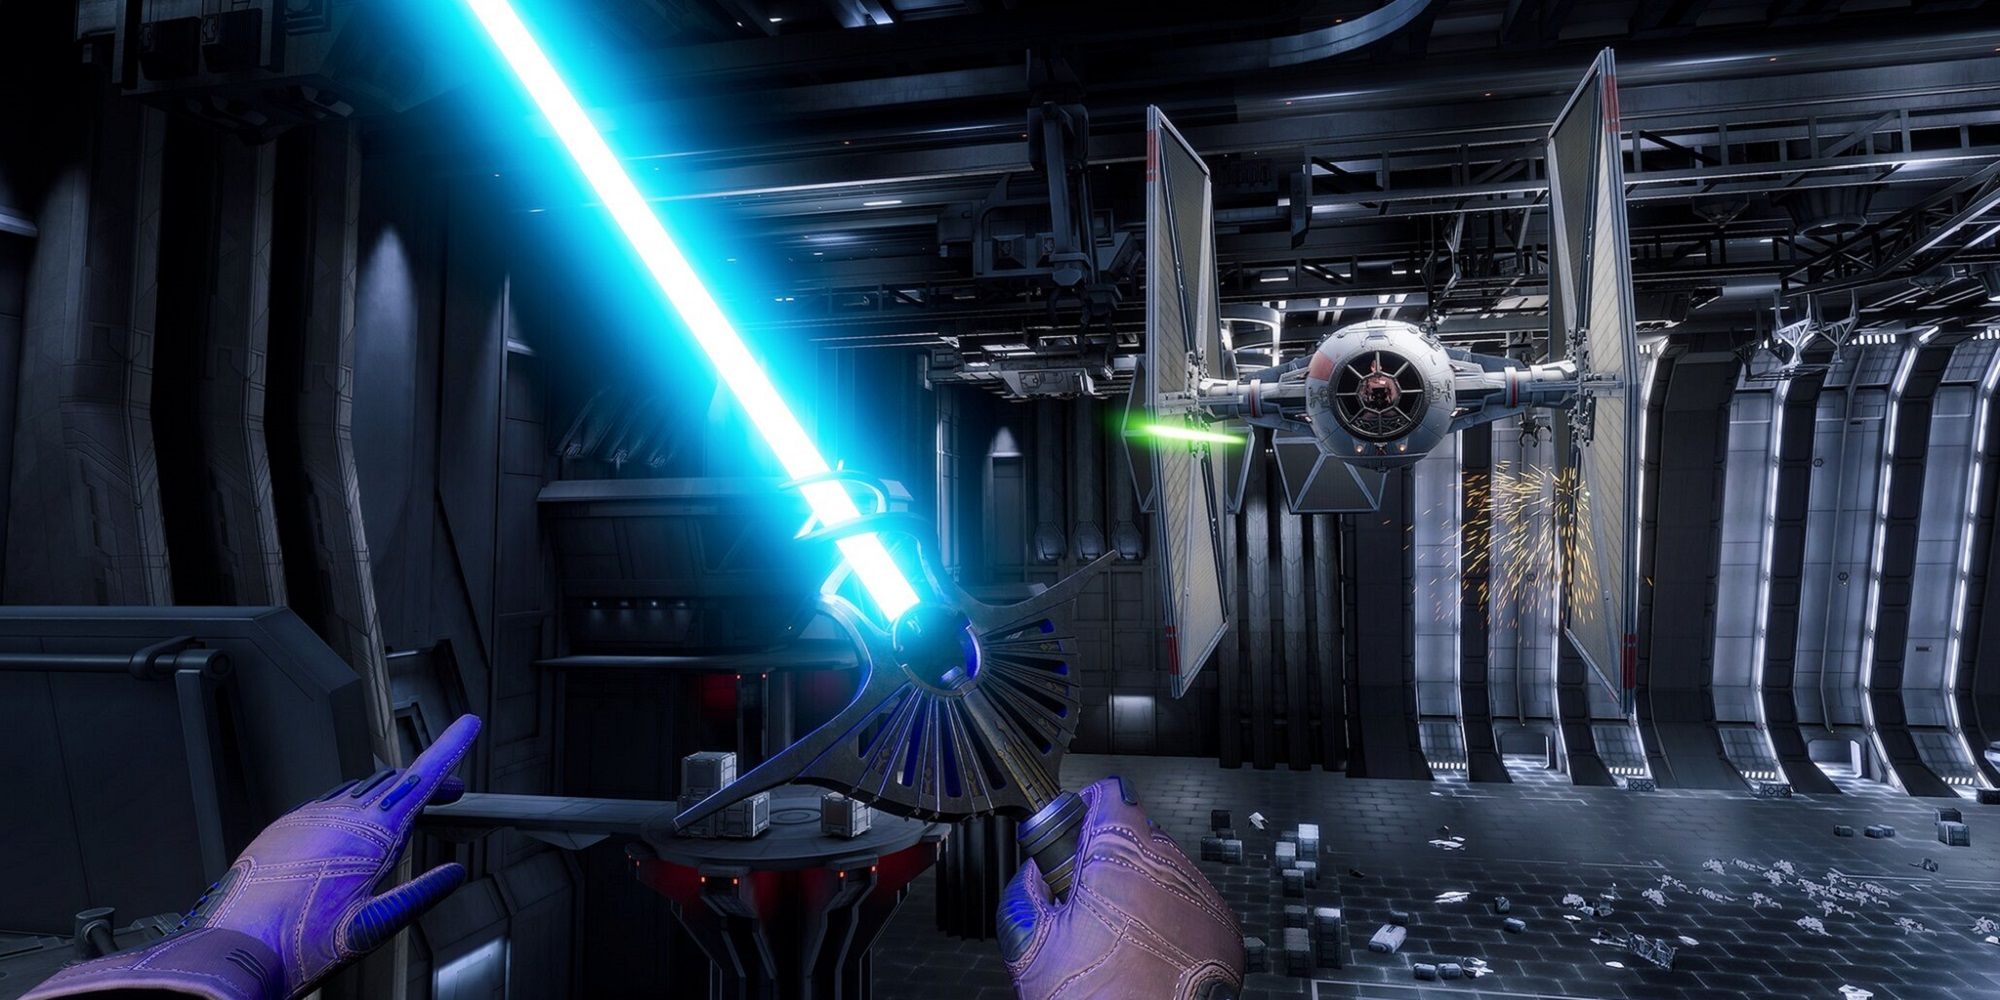 Forget Fallen Order, Vader Immortal Is The Best Star Wars Game